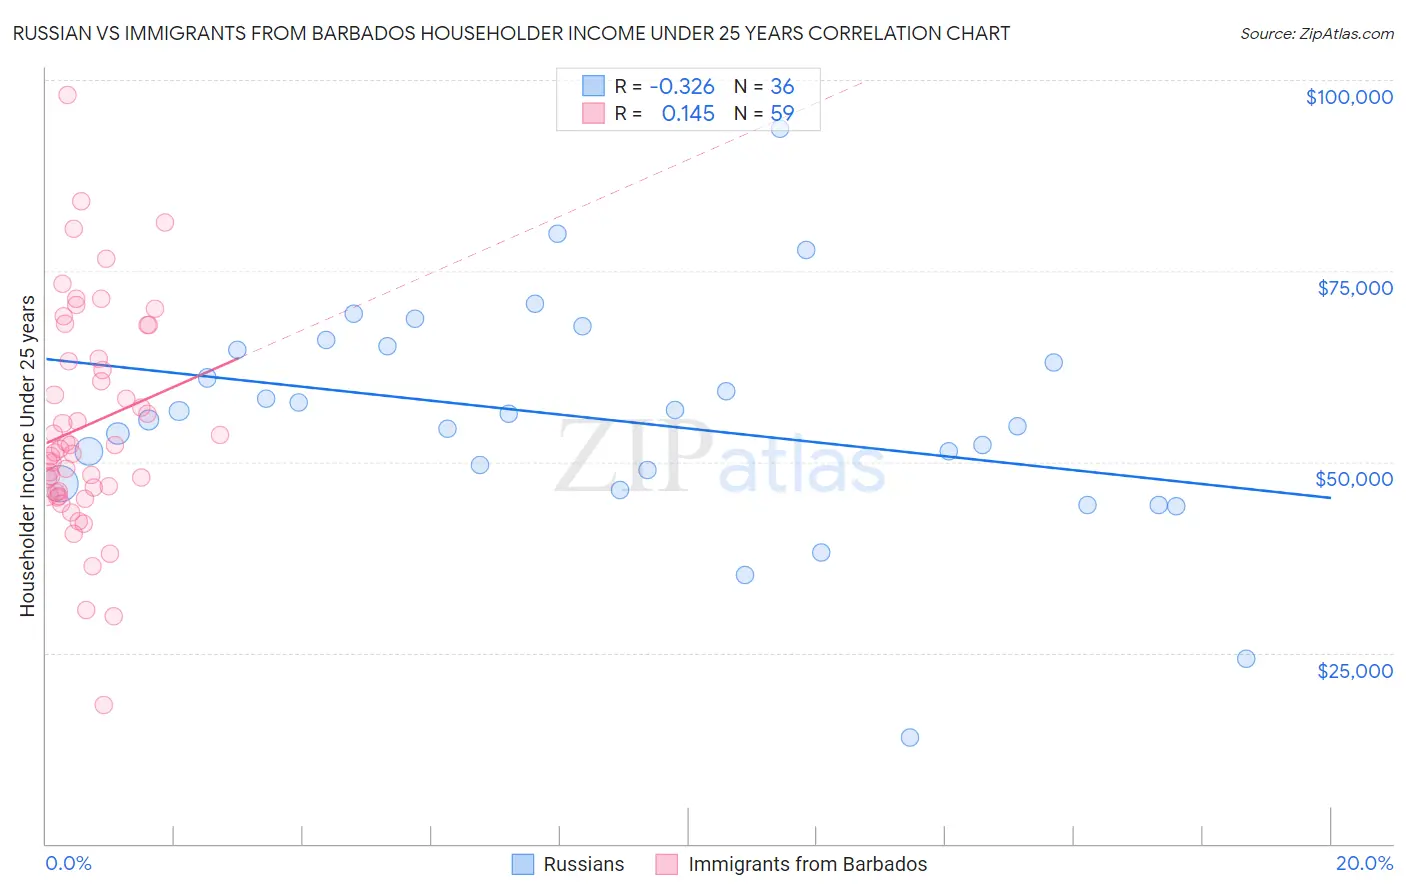 Russian vs Immigrants from Barbados Householder Income Under 25 years